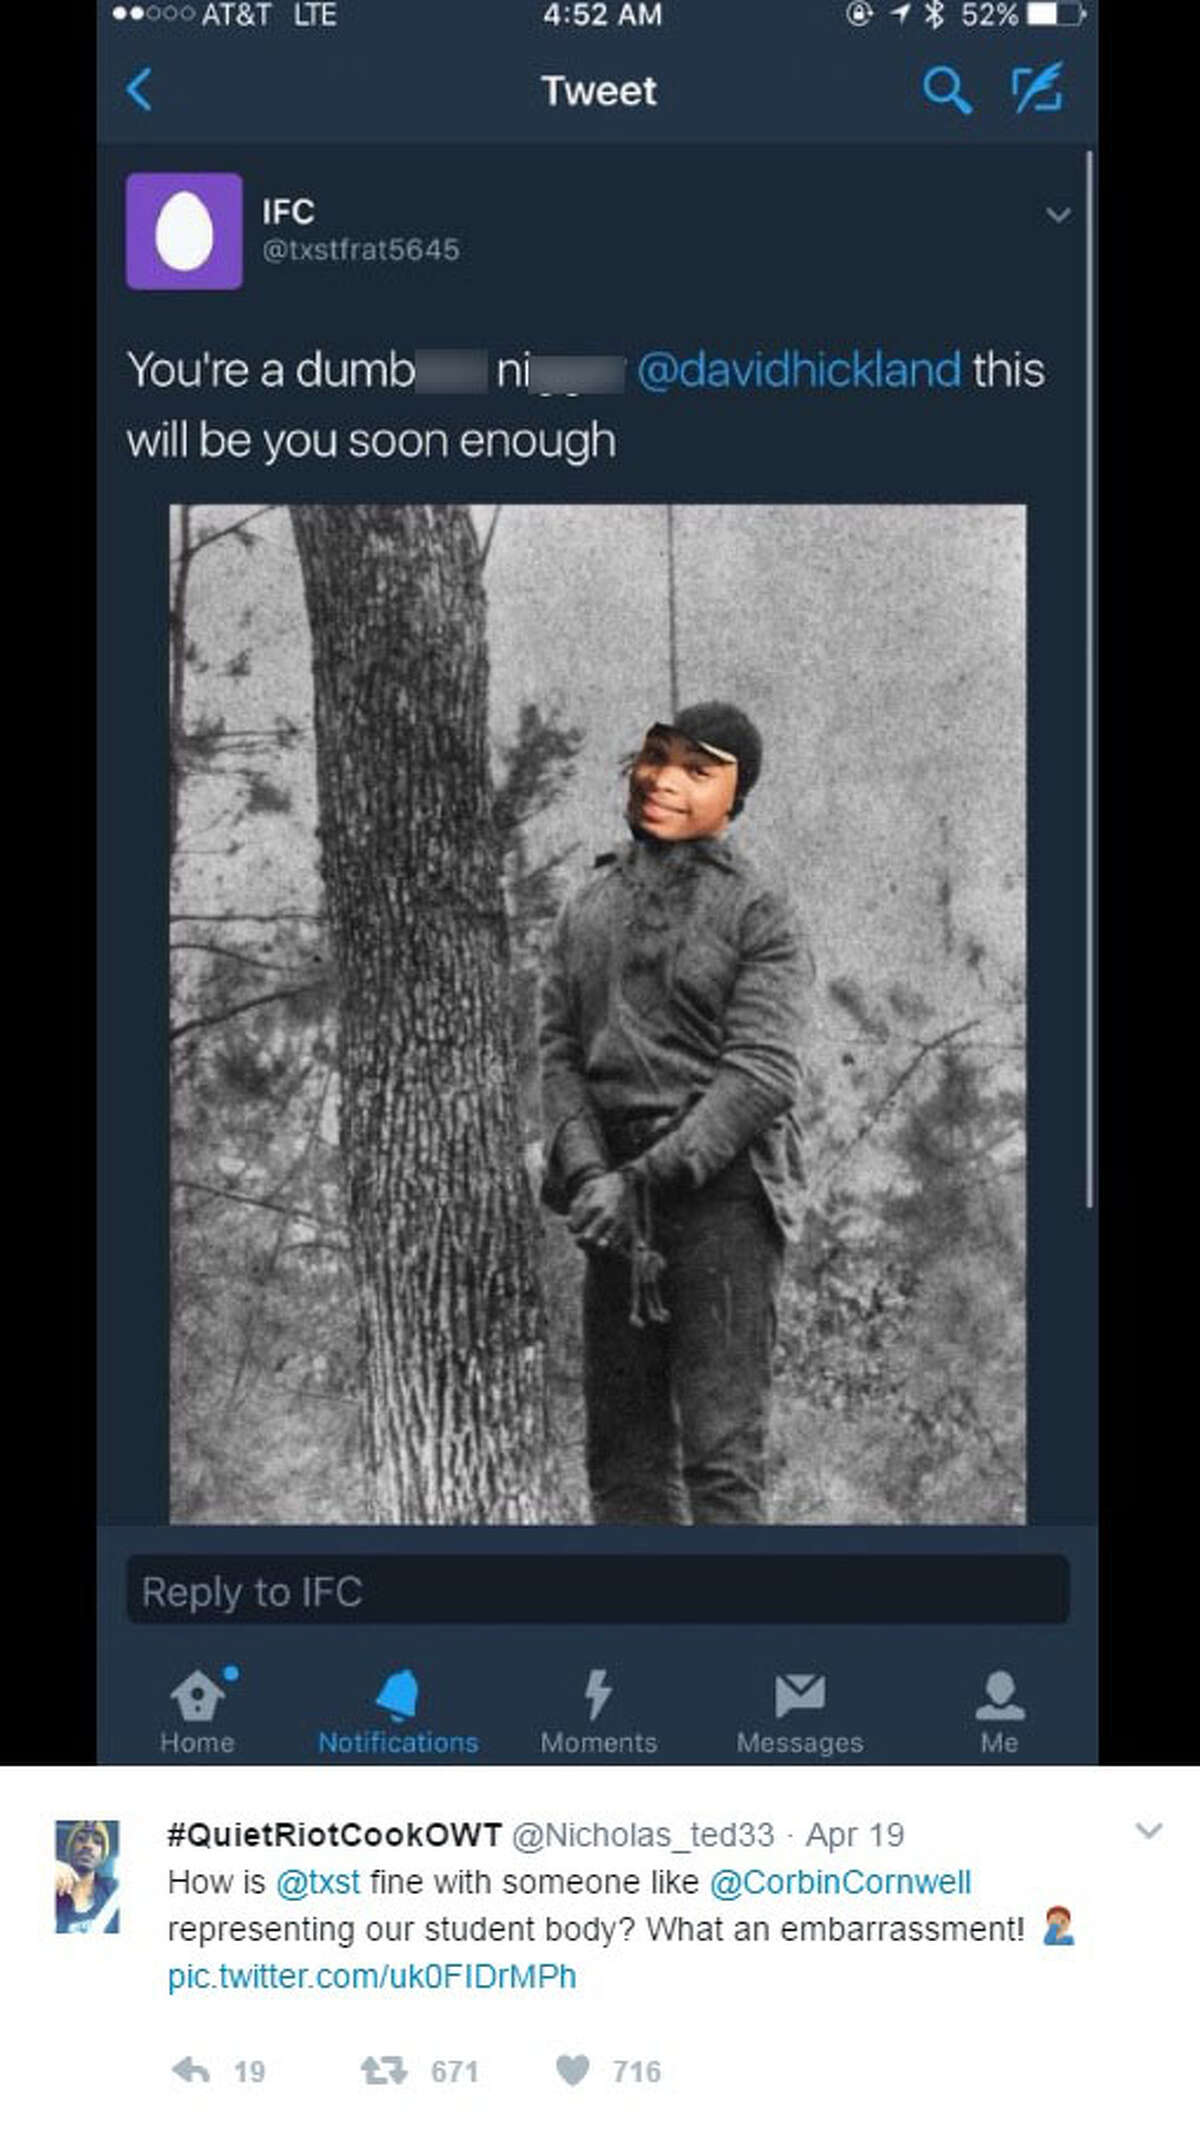 @Nicholas_ted33 shared a screenshot of a tweet that appears to show Texas State student David Hickland's head photo-shopped onto a lynched body.